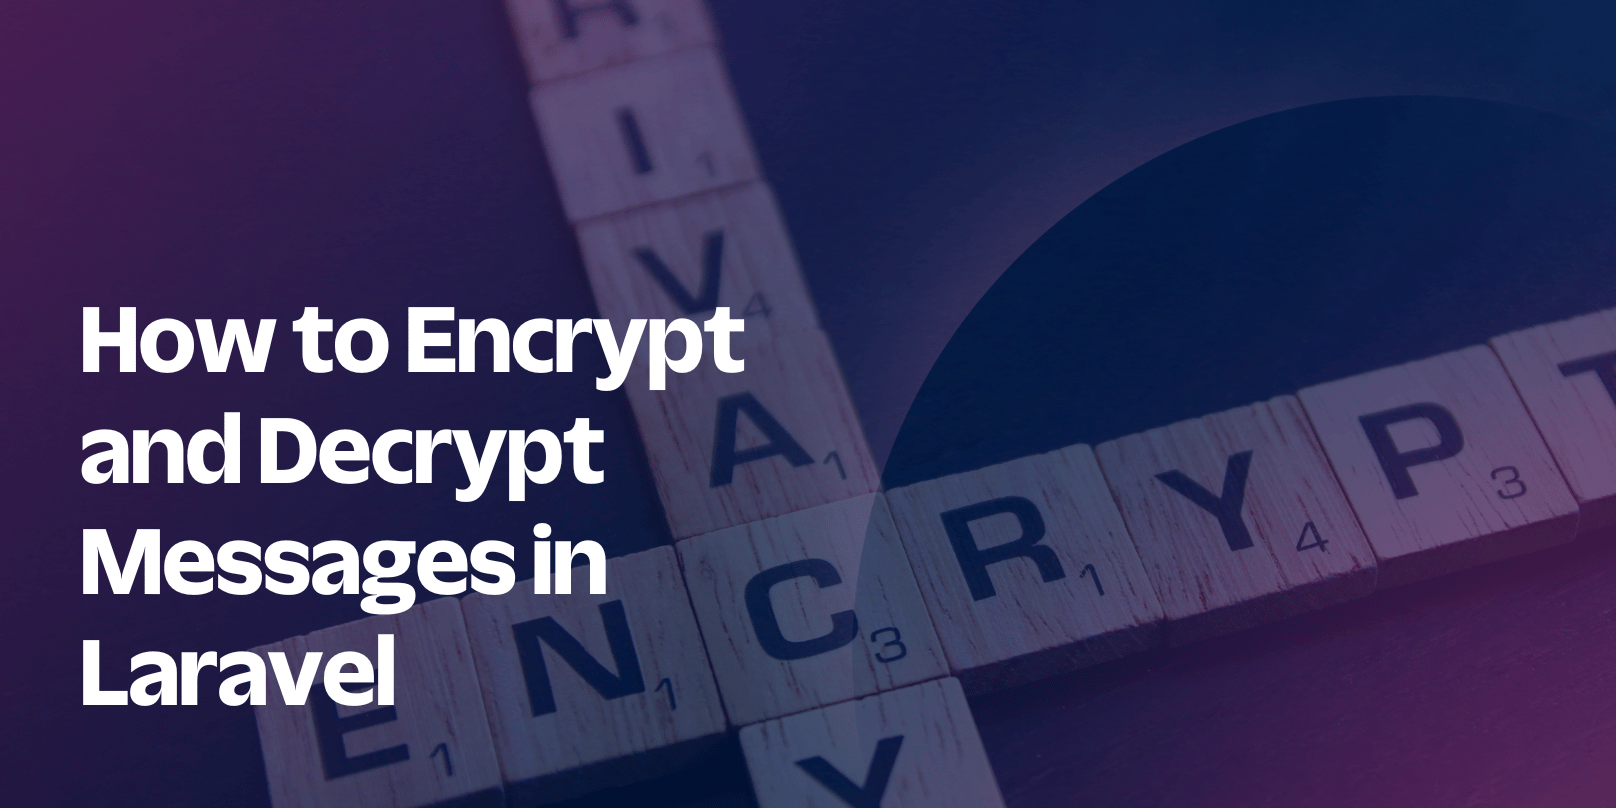 How to Encrypt and Decrypt Messages in Laravel